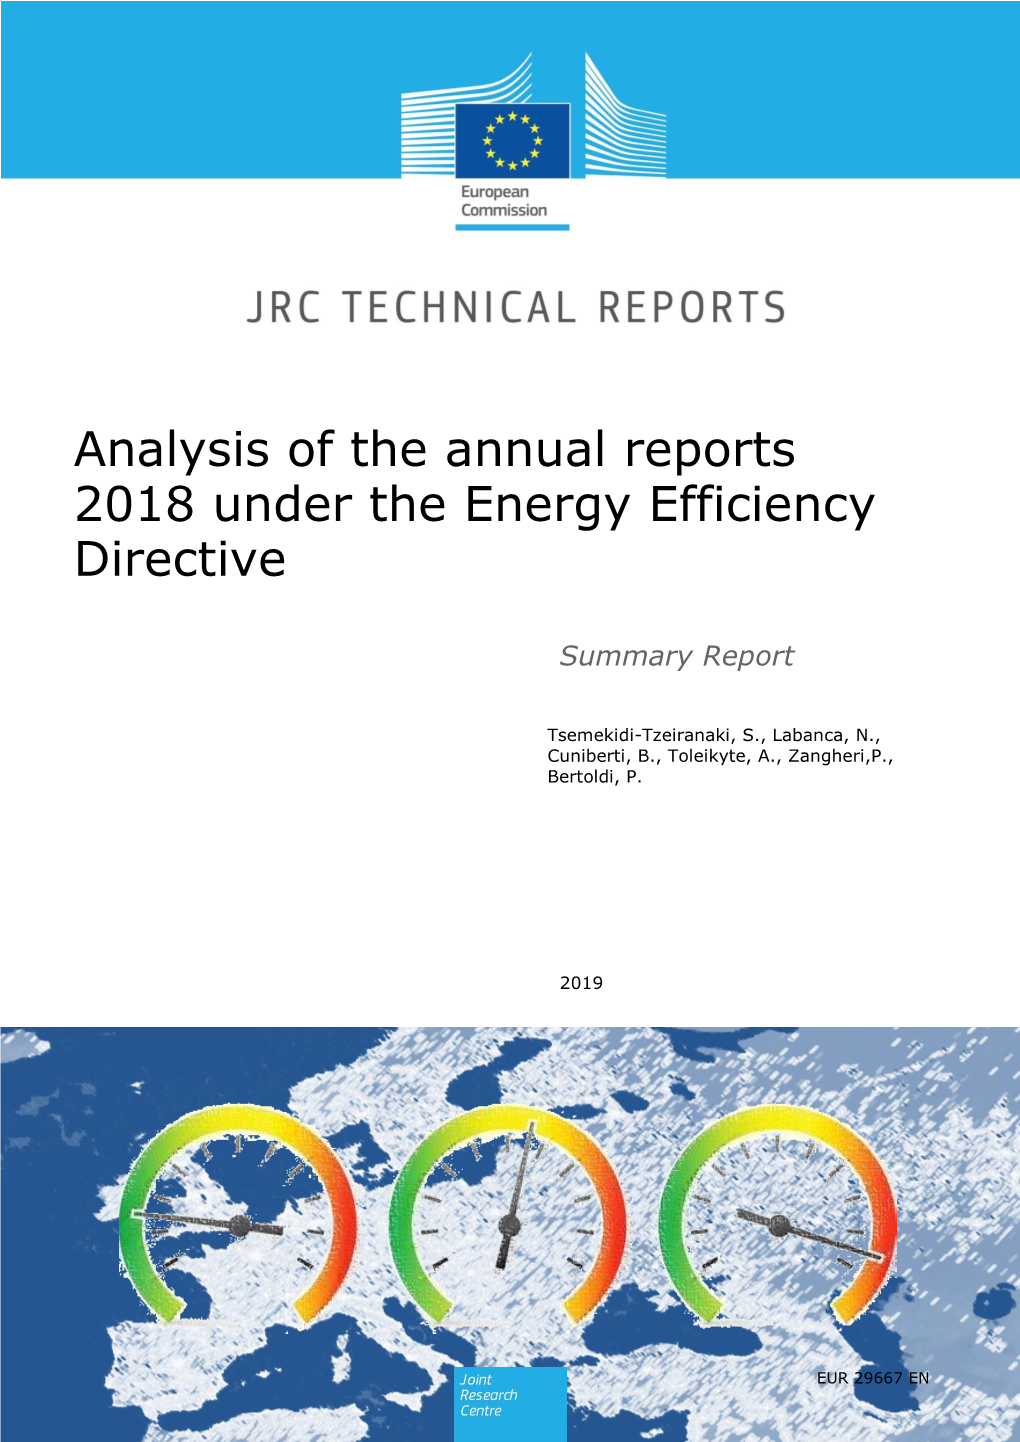 Analysis of the Annual Reports 2018 Under the Energy Efficiency Directive